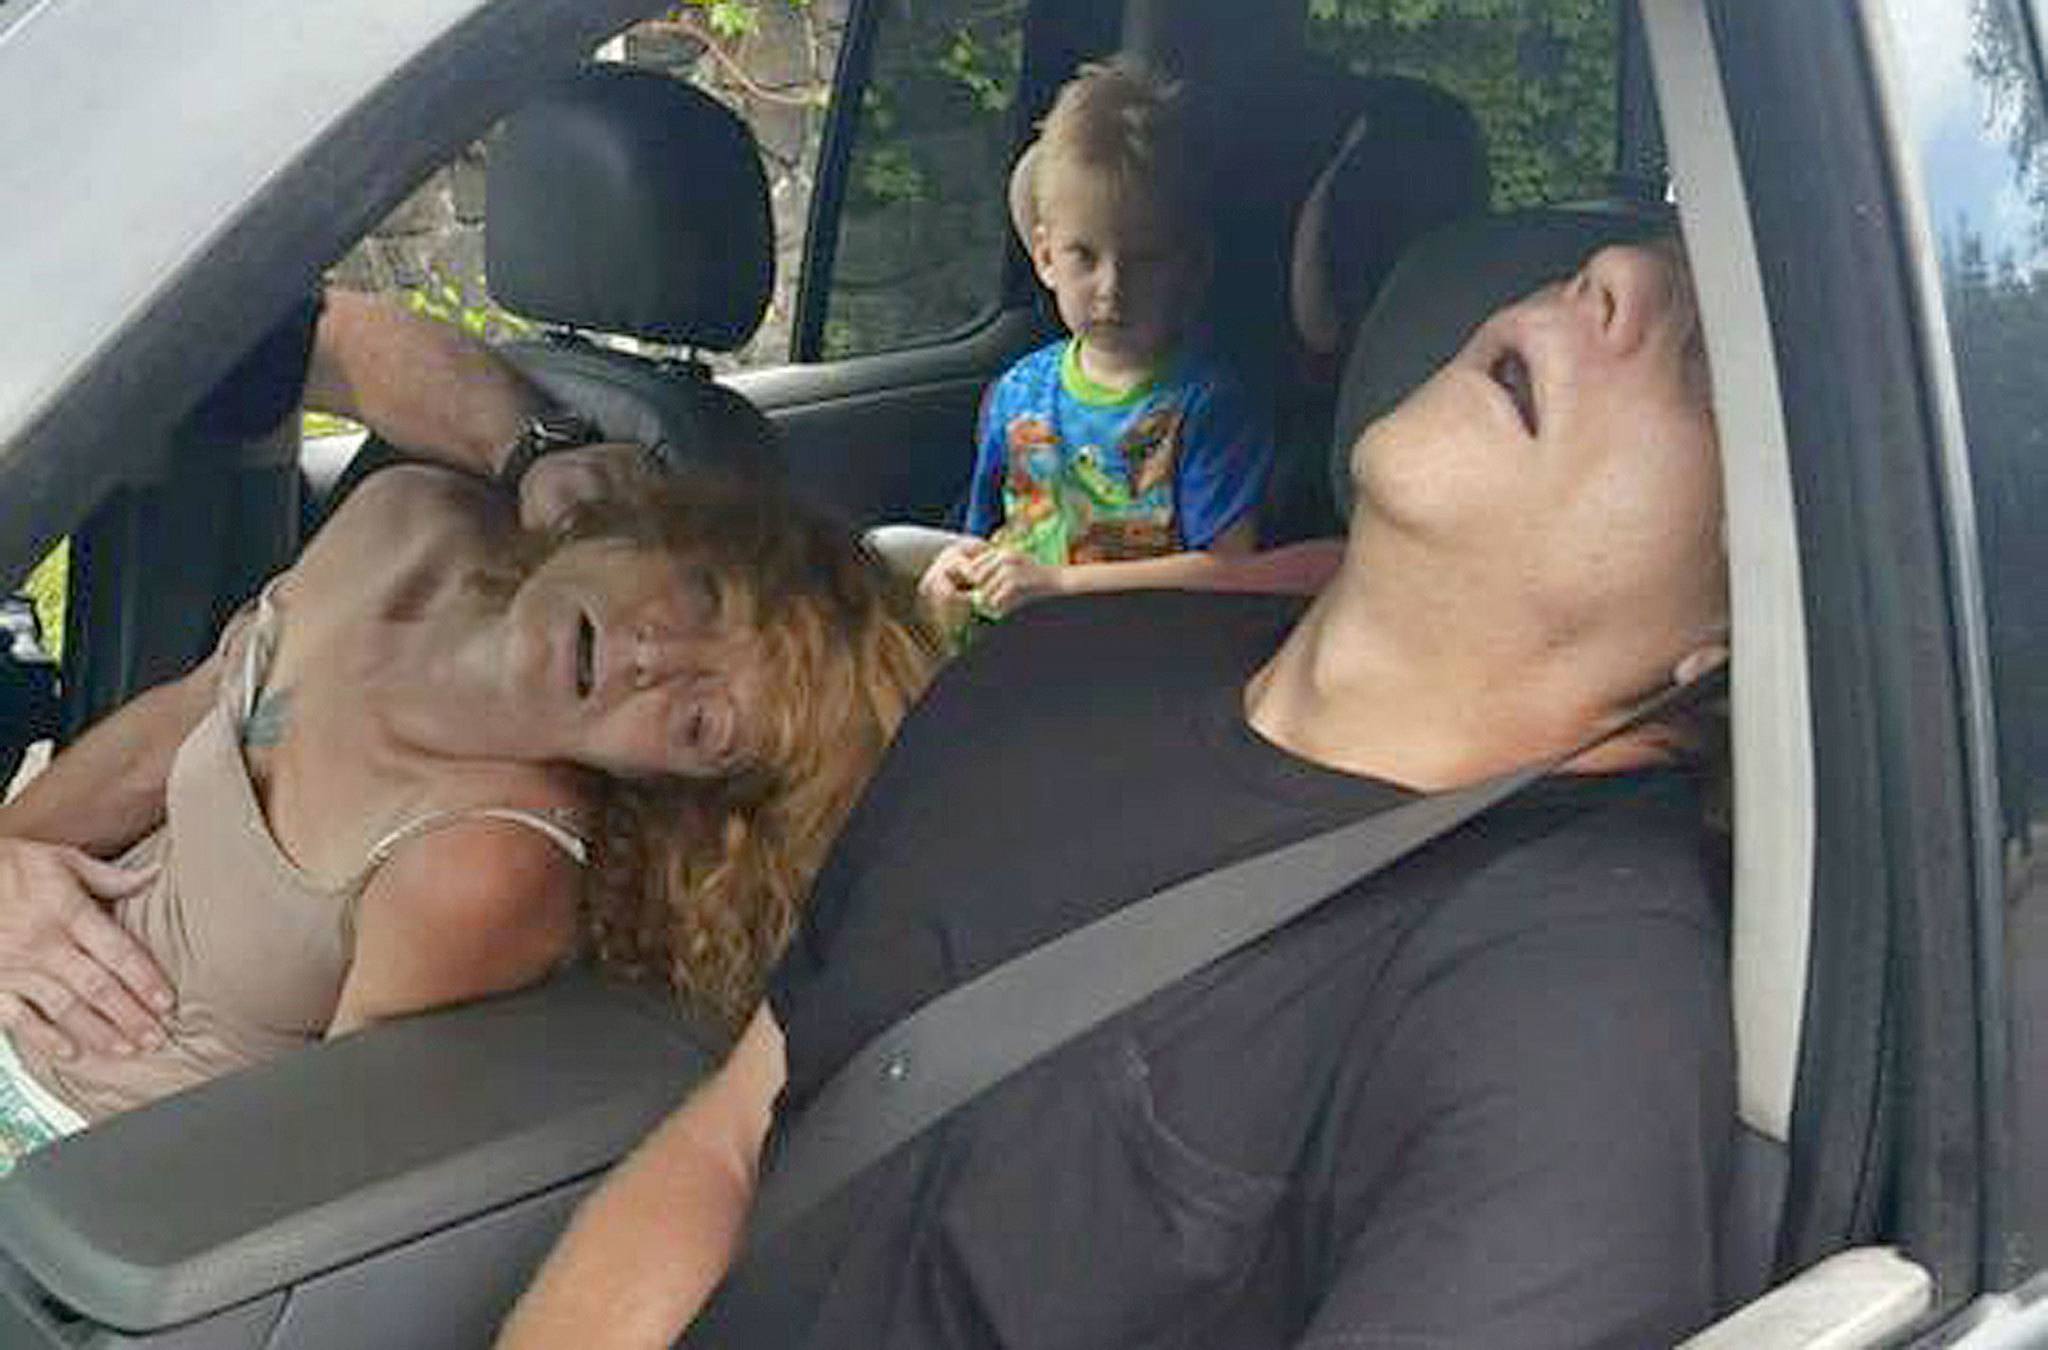 A child sits in a vehicle behind his mother and a man, both of whom are unconscious from a drug overdose in East Liverpool, Ohio, on Wednesday. (East Liverpool Police Department)